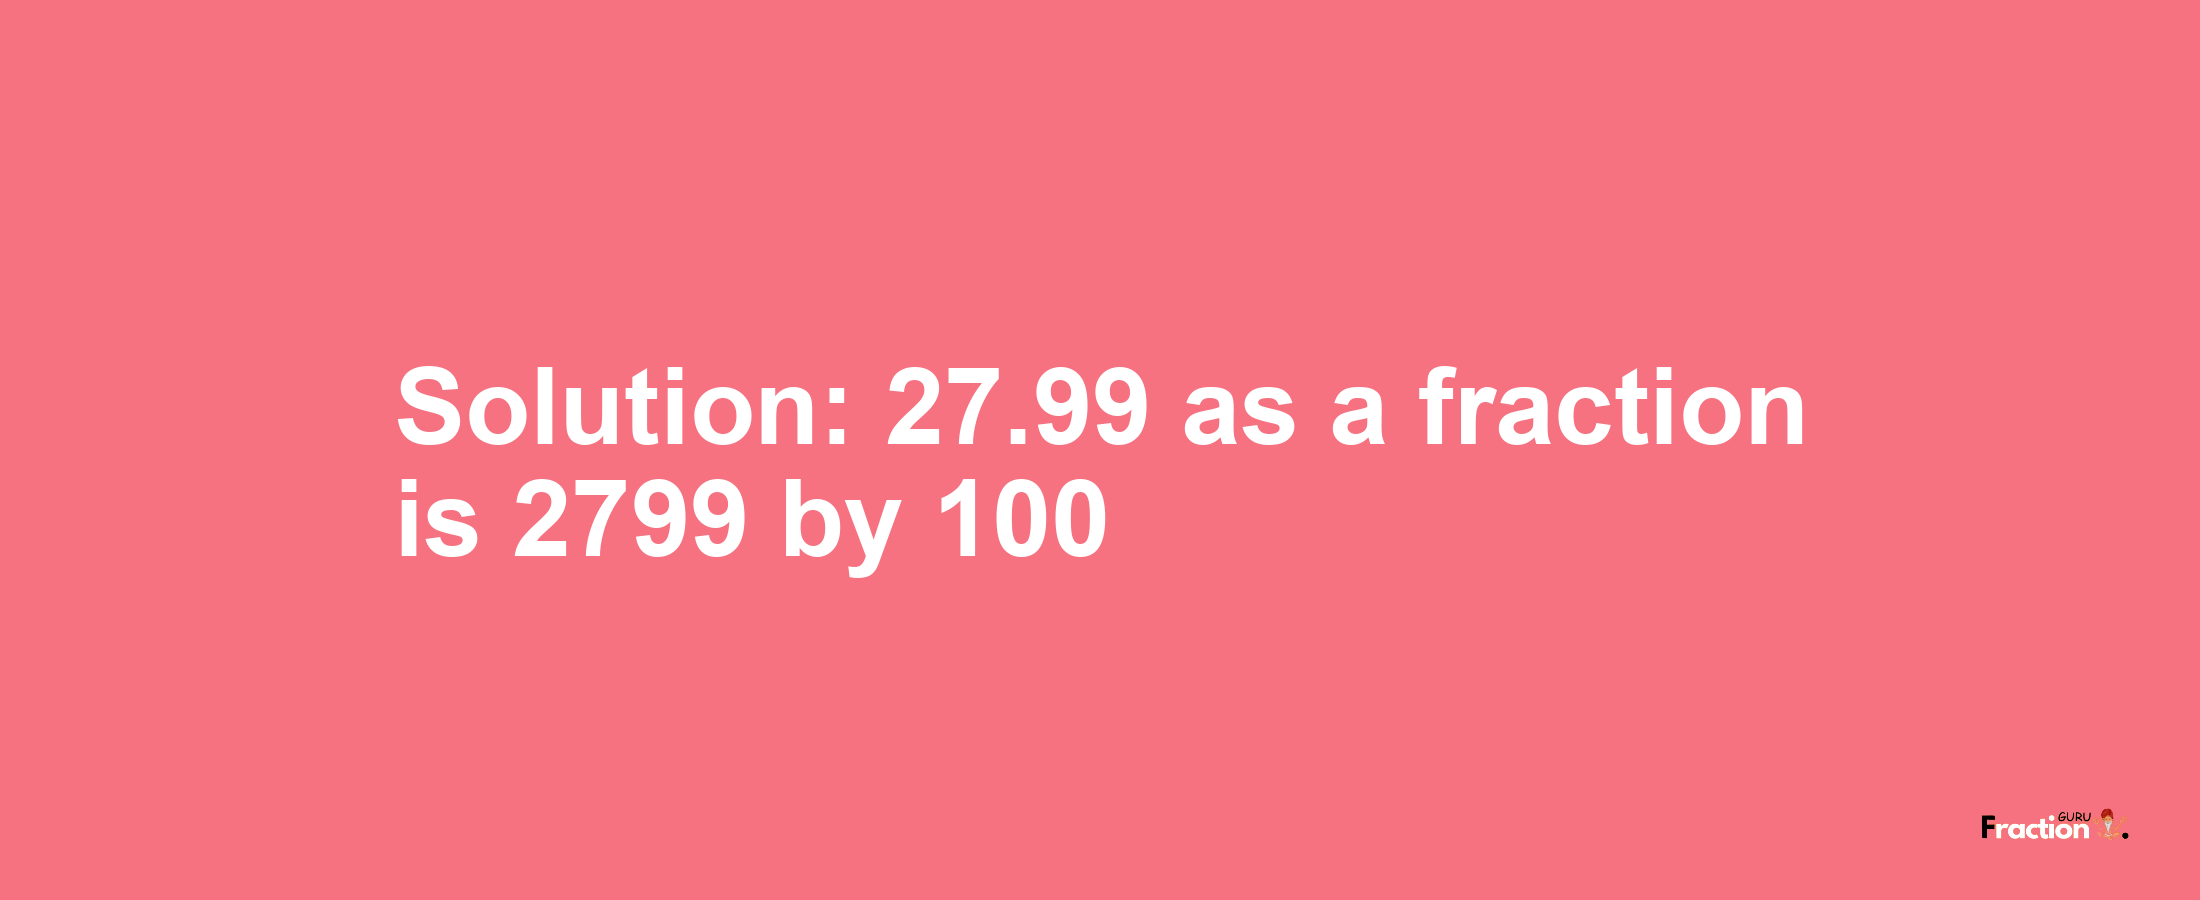 Solution:27.99 as a fraction is 2799/100